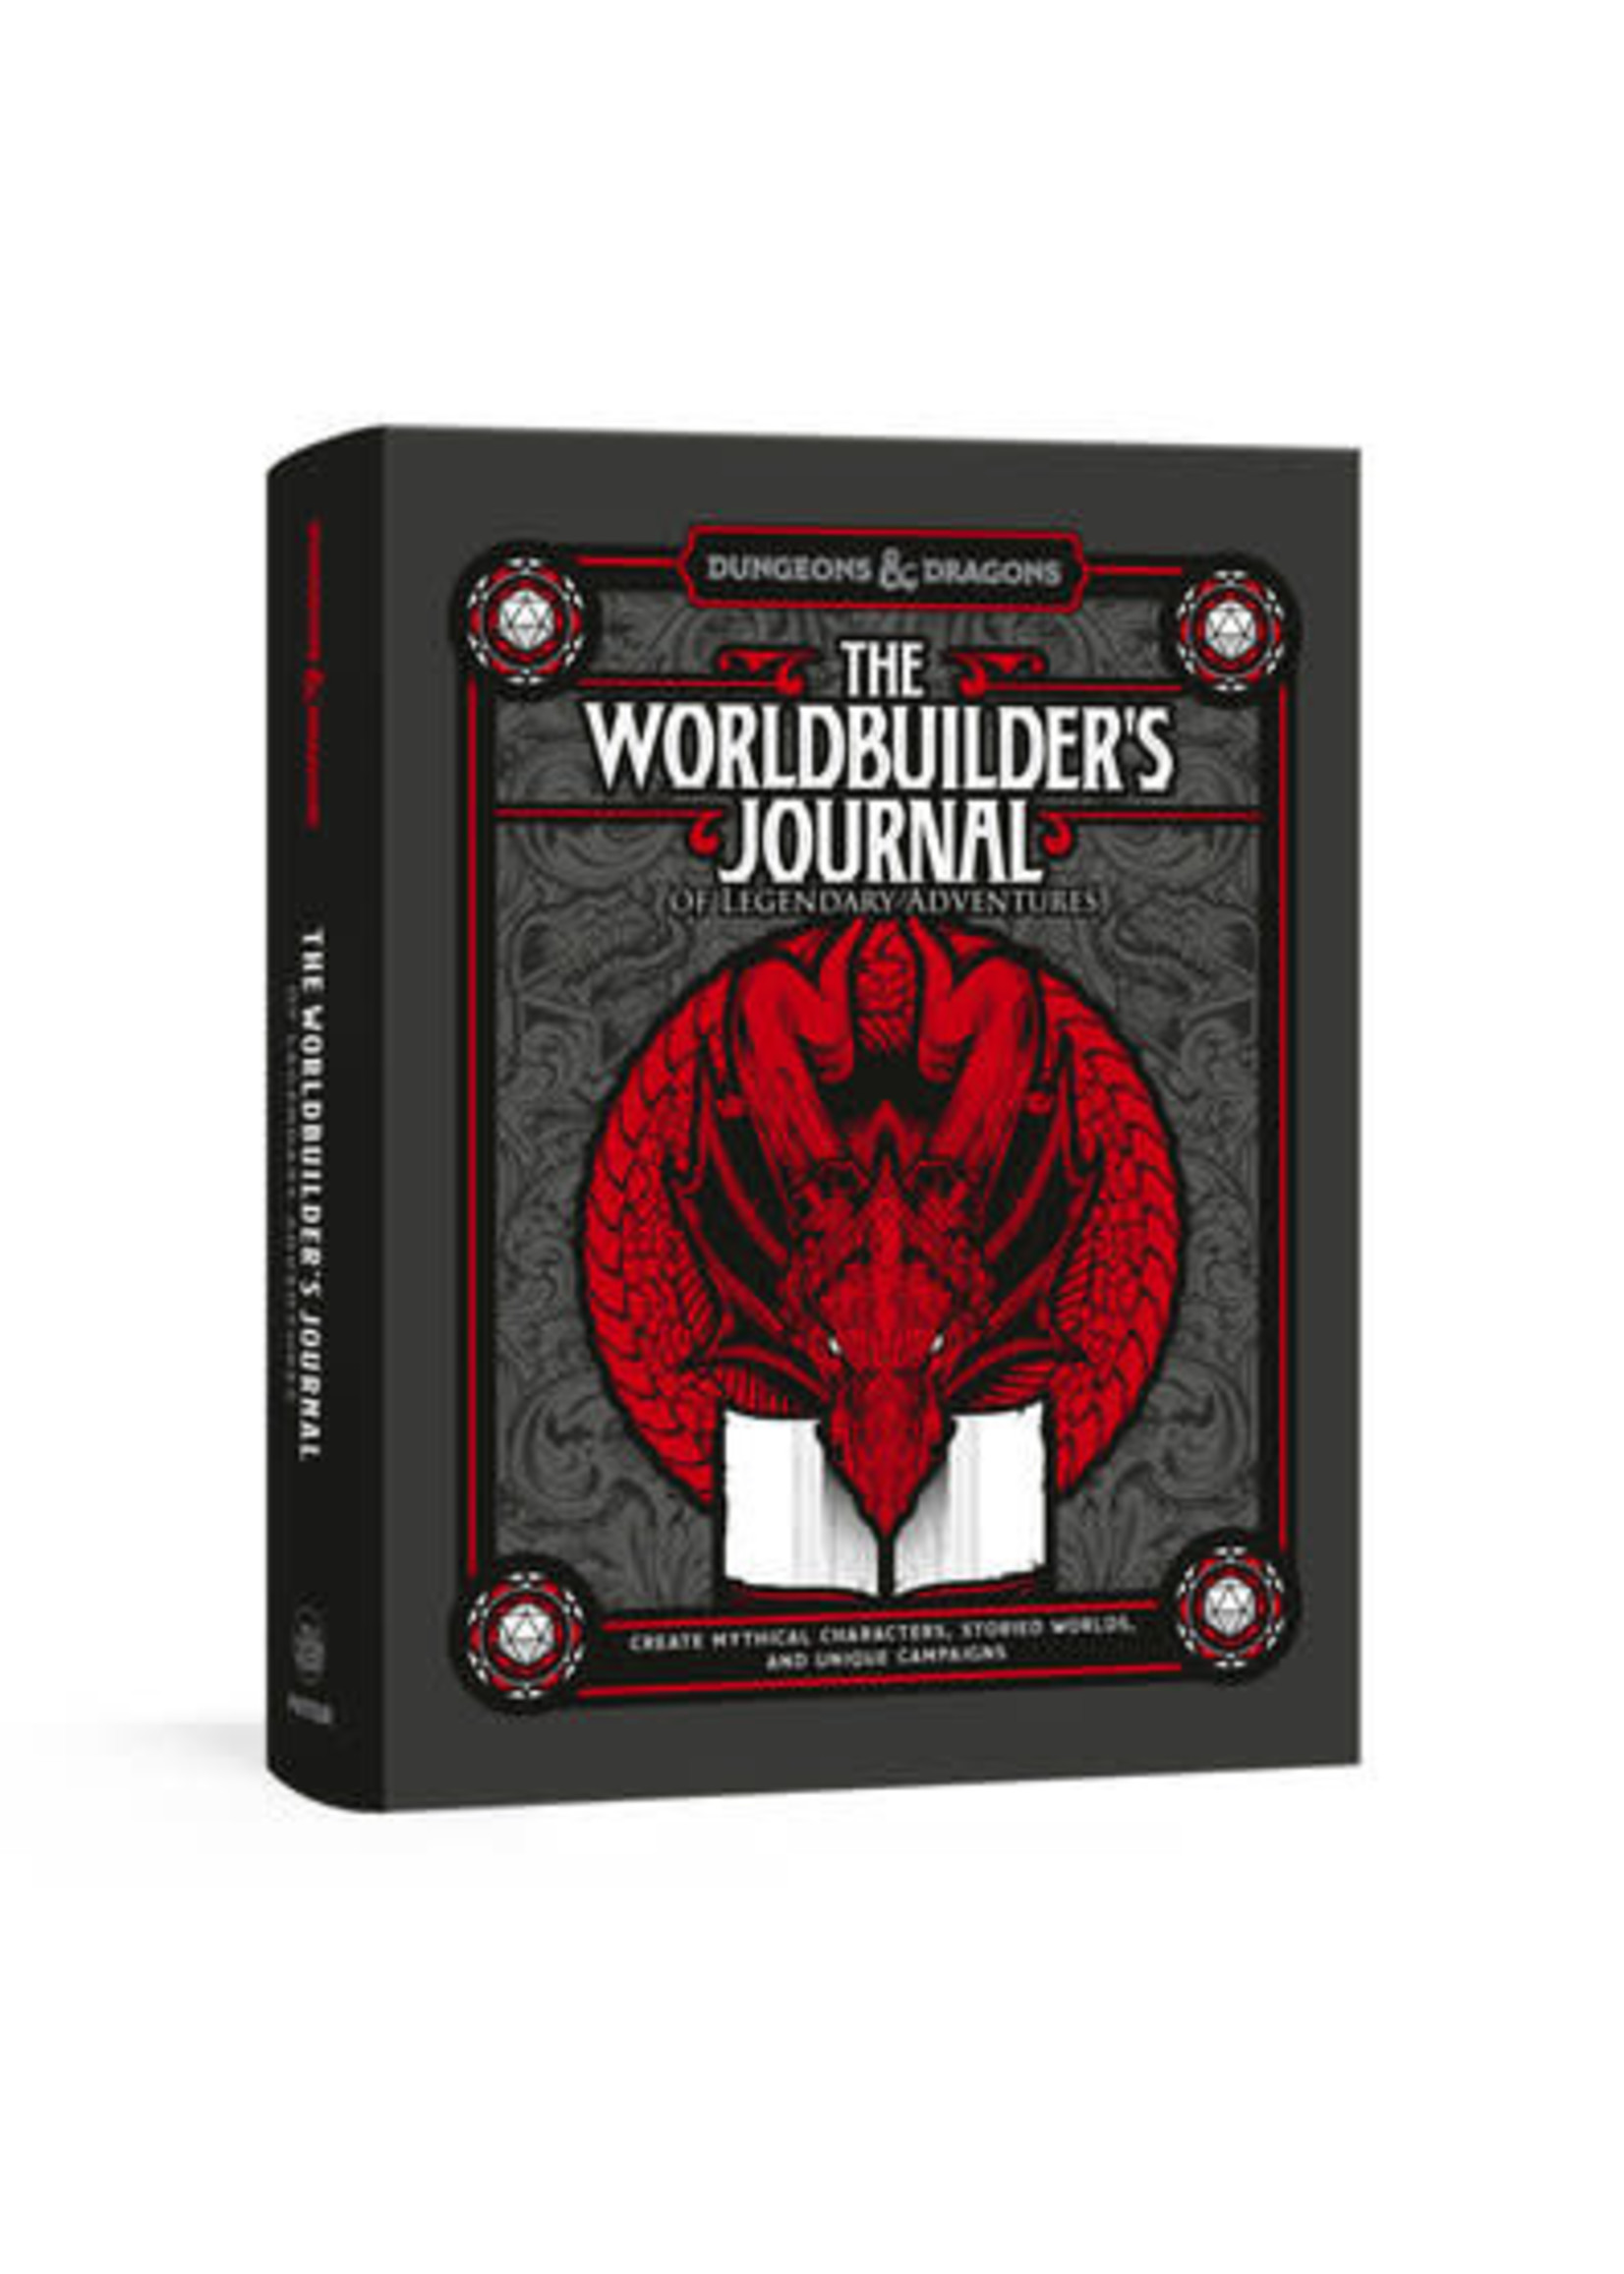 Wizards of the Coast D&D 5th: The Worldbuilder's Journal of Legendary Adventures